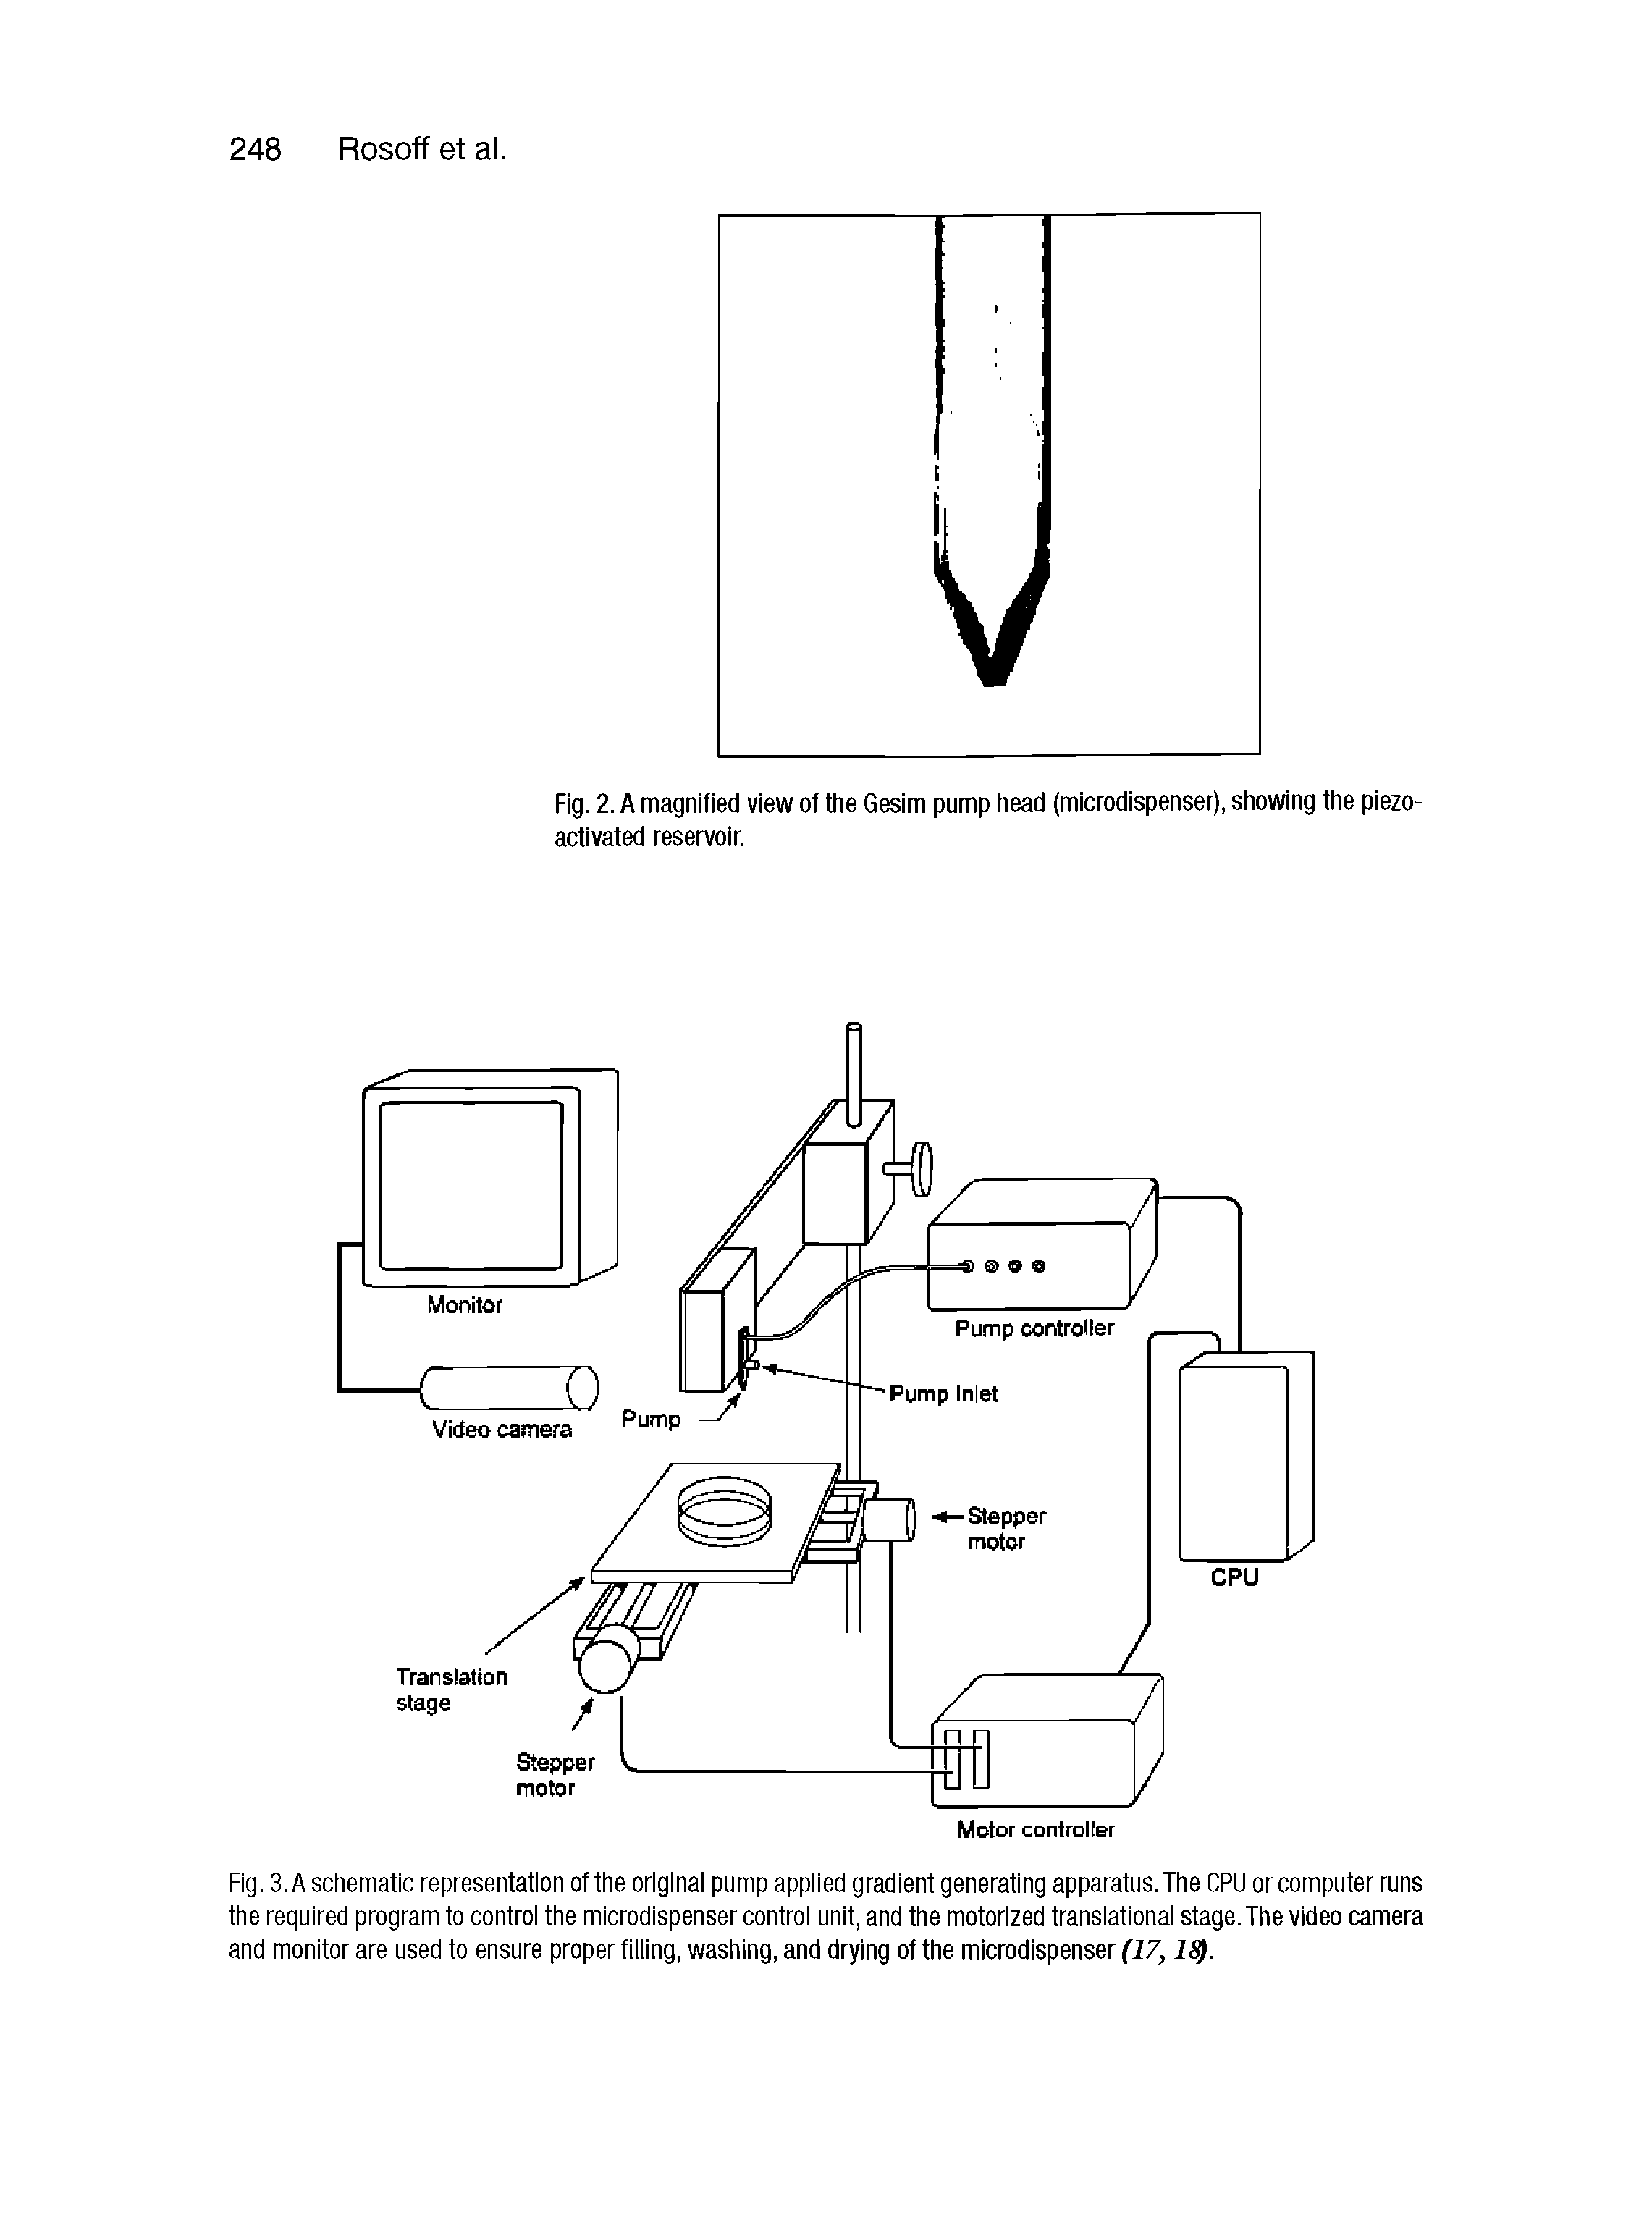 Fig. 3. A schematic representation of the original pump applied gradient generating apparatus. The CPU or computer runs the required program to control the microdispenser control unit, and the motorized translational stage. The video camera and monitor are used to ensure proper tilling, washing, and drying of the microdispenser (17,1. ...